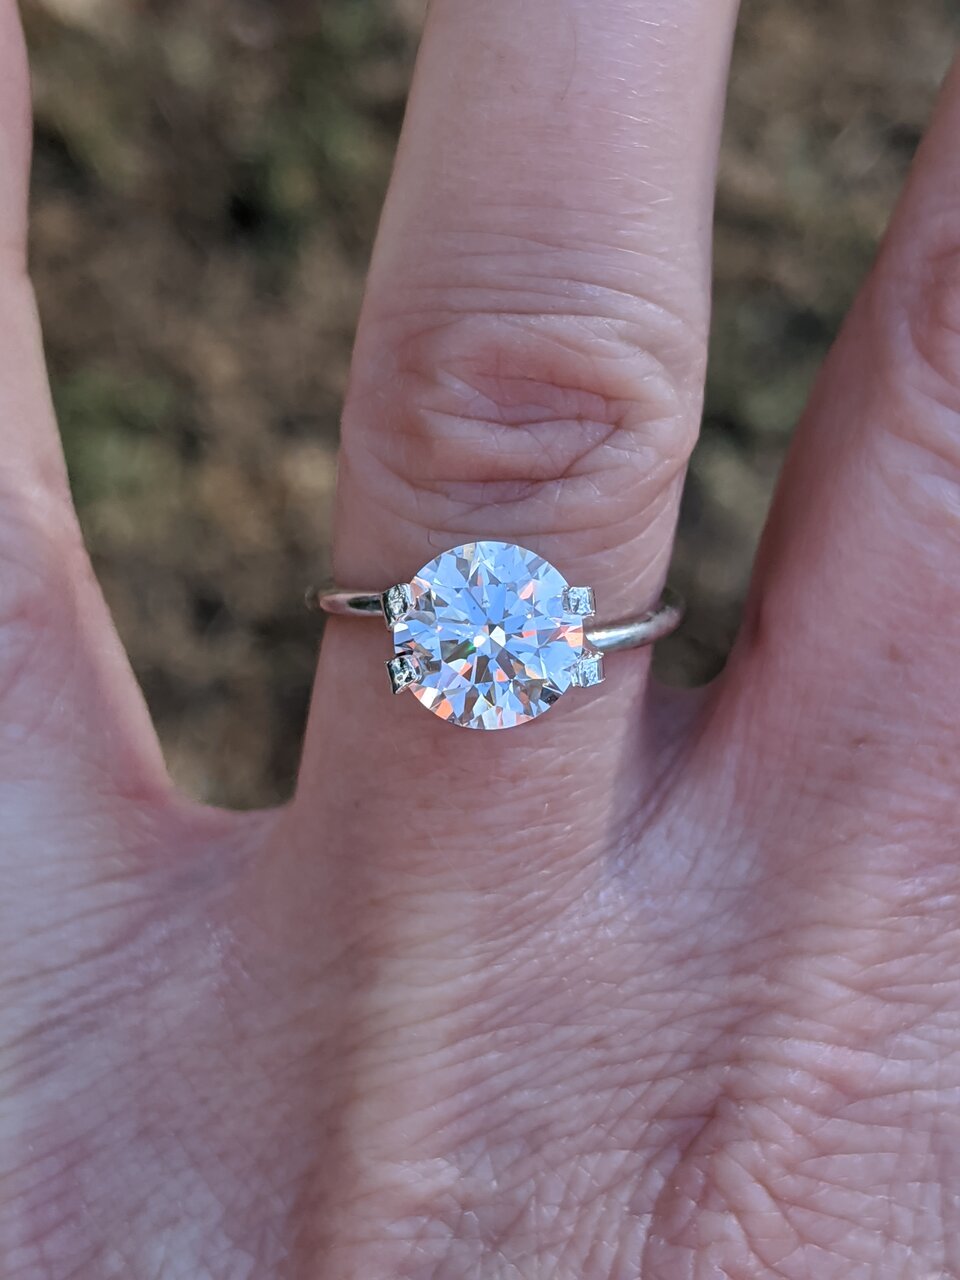 soxfanSoxfan posted this unbelievable K diamond ring in the Show Me the Bling forum at PriceScope.  If you are like me, you will struggle with believing this incredible beauty is a K. K’s can be beautiful, to be sure, but this sets a new bar!